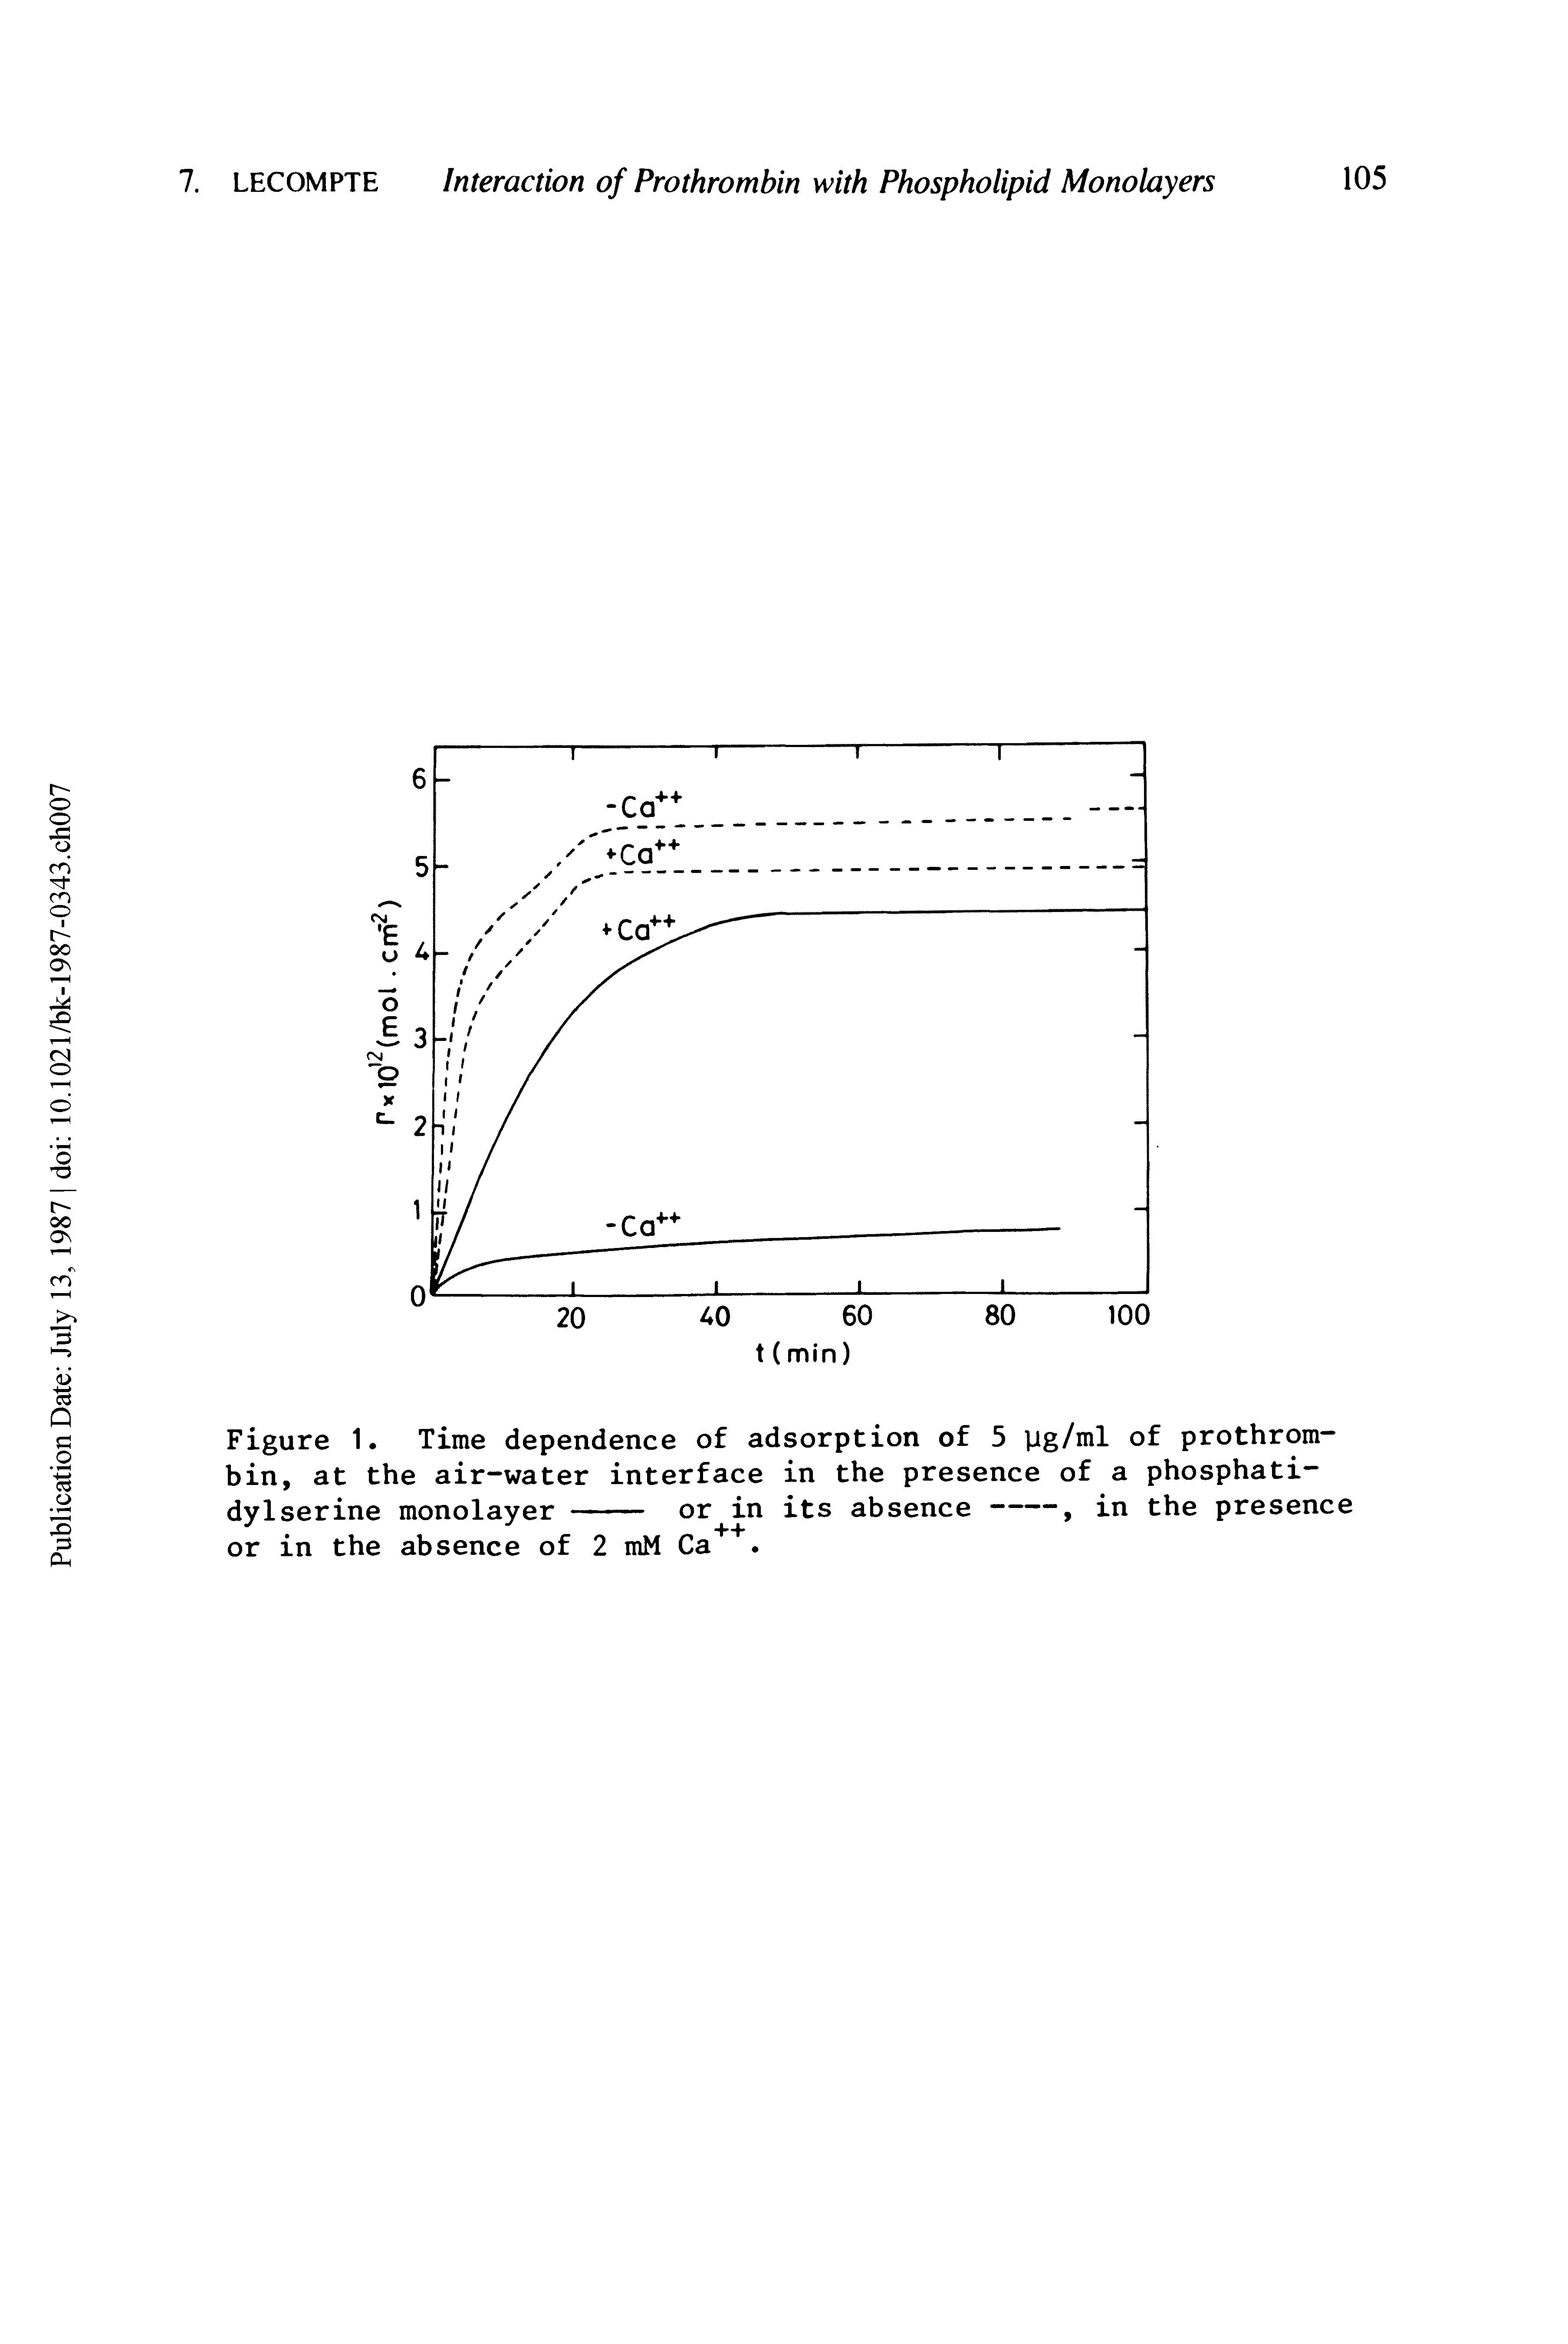 Figure 1. Time dependence of adsorption of 5 yg/ml of prothrombin, at the air-water interface in the presence of a phosphati-...